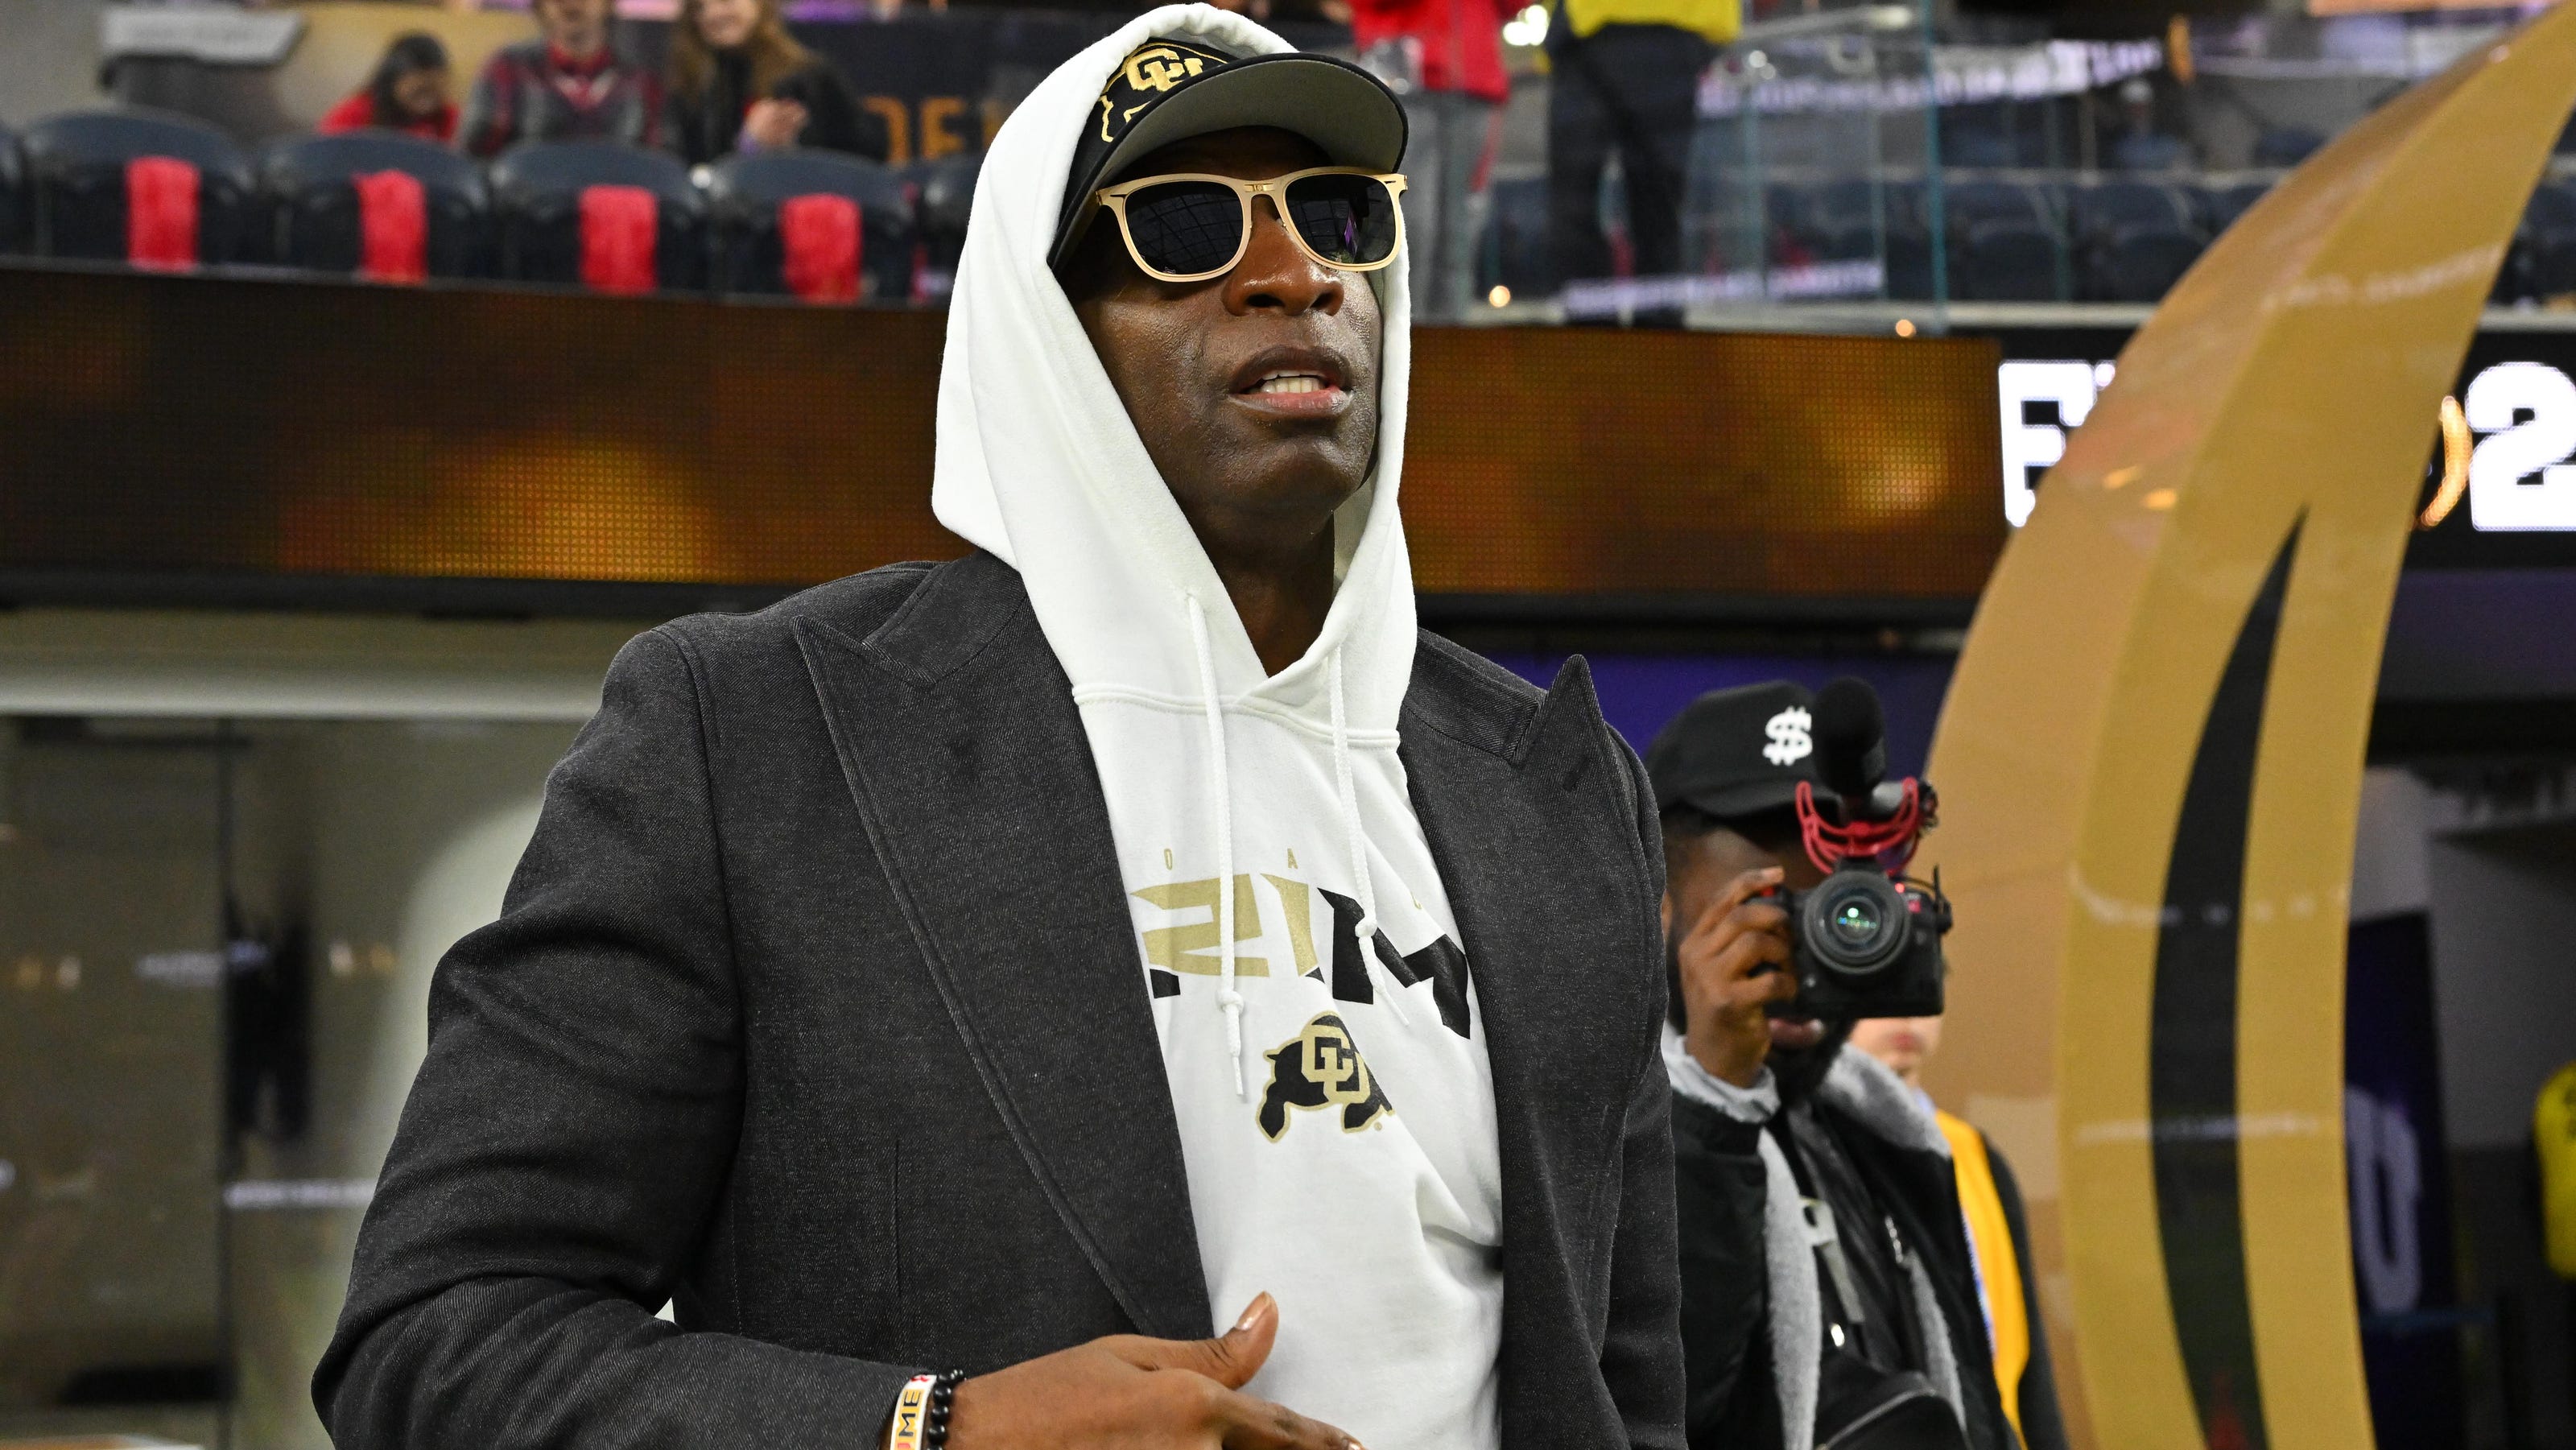 Deion Sanders, Nike become an awkward fit at Colorado